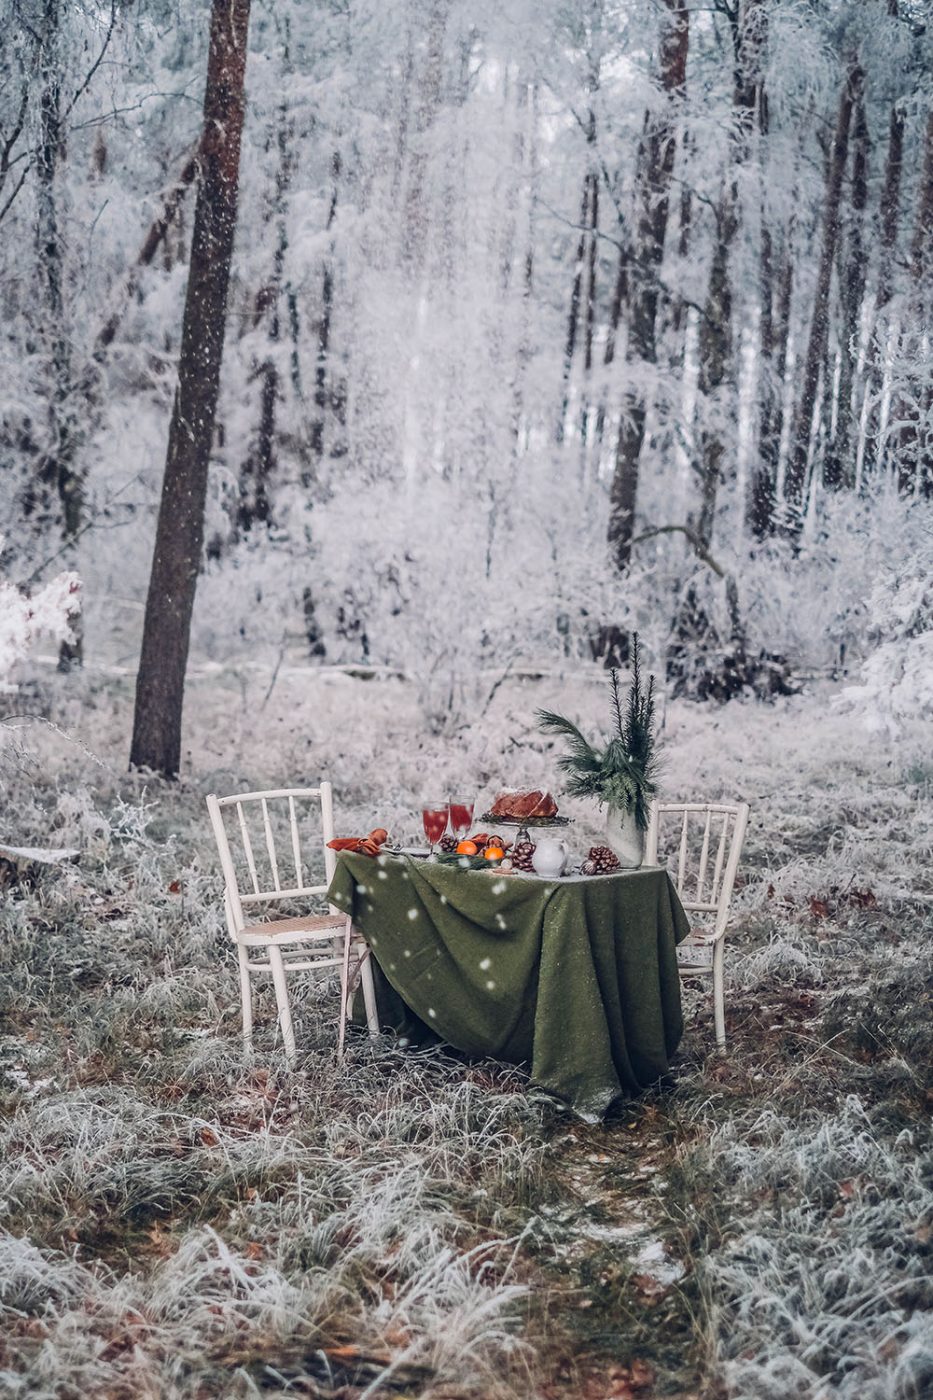 Image for A snowy Picnic in the Woods